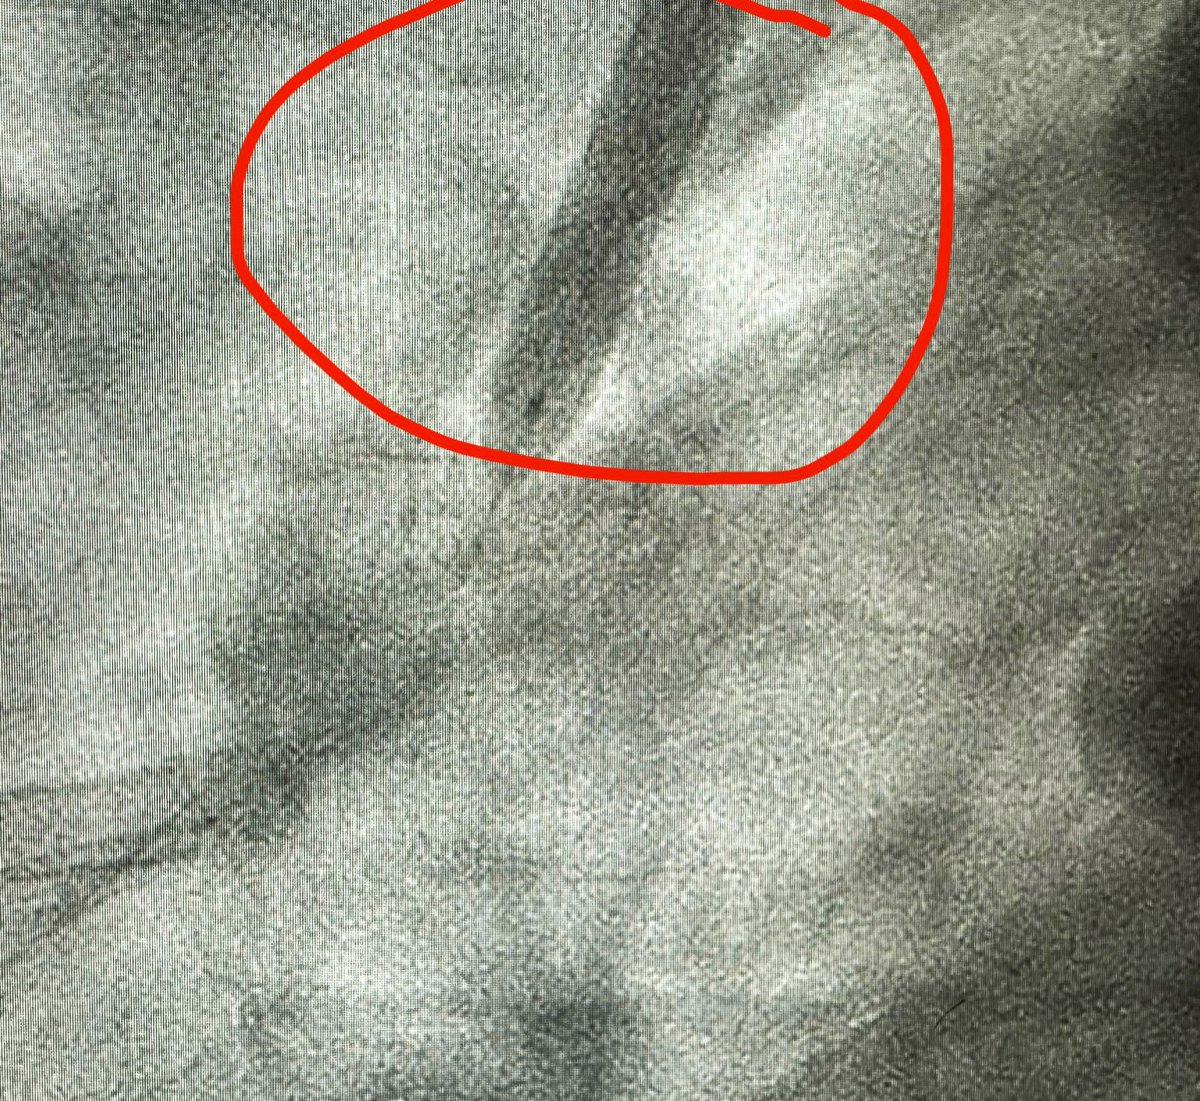 1/2 #StentLoss Acute Inferior MI: complicated by incessant VF⚡️and pt movement. Culprit proximal RCA thrombotic occlusion: with severe diffuse underlying dz. Distal-to-ostial IVUS-guided 👁️ PCI/DES: but…final (short) ostial stent mis-deployed. Recaptured over new balloon🎈and…